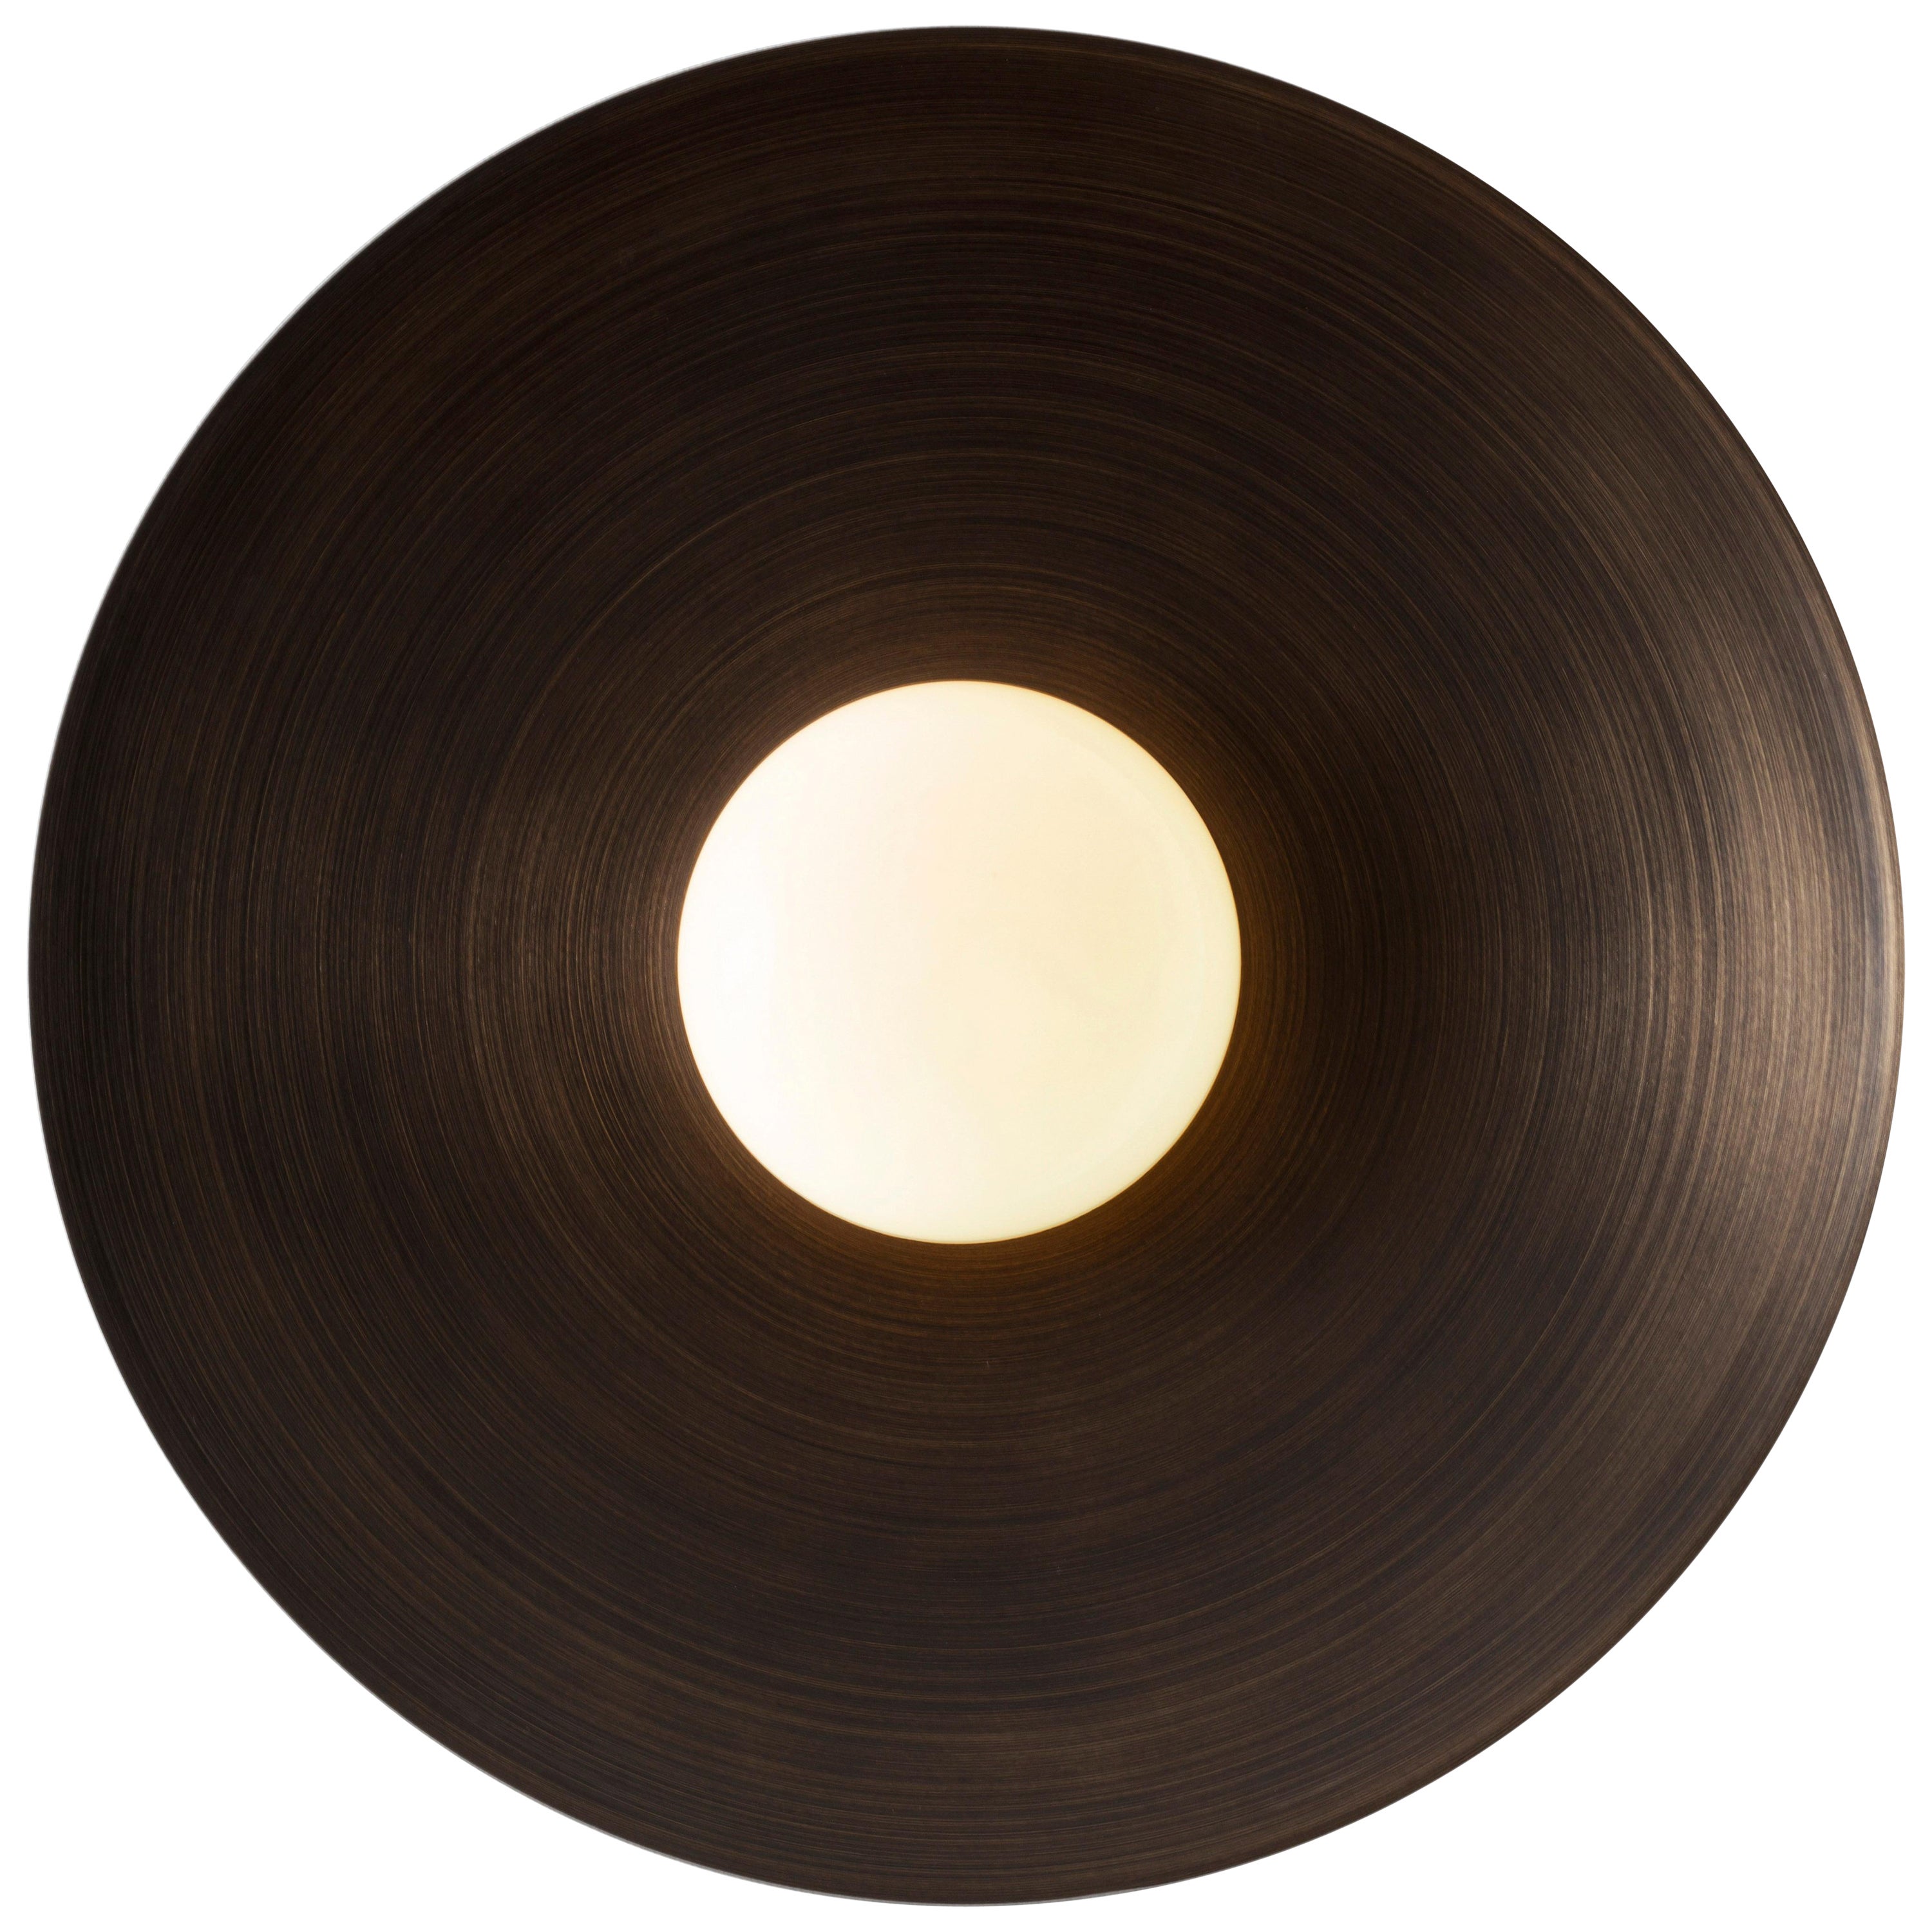 Allegro Sconce 12" in Brass Finishes by Matthew Fairbank For Sale